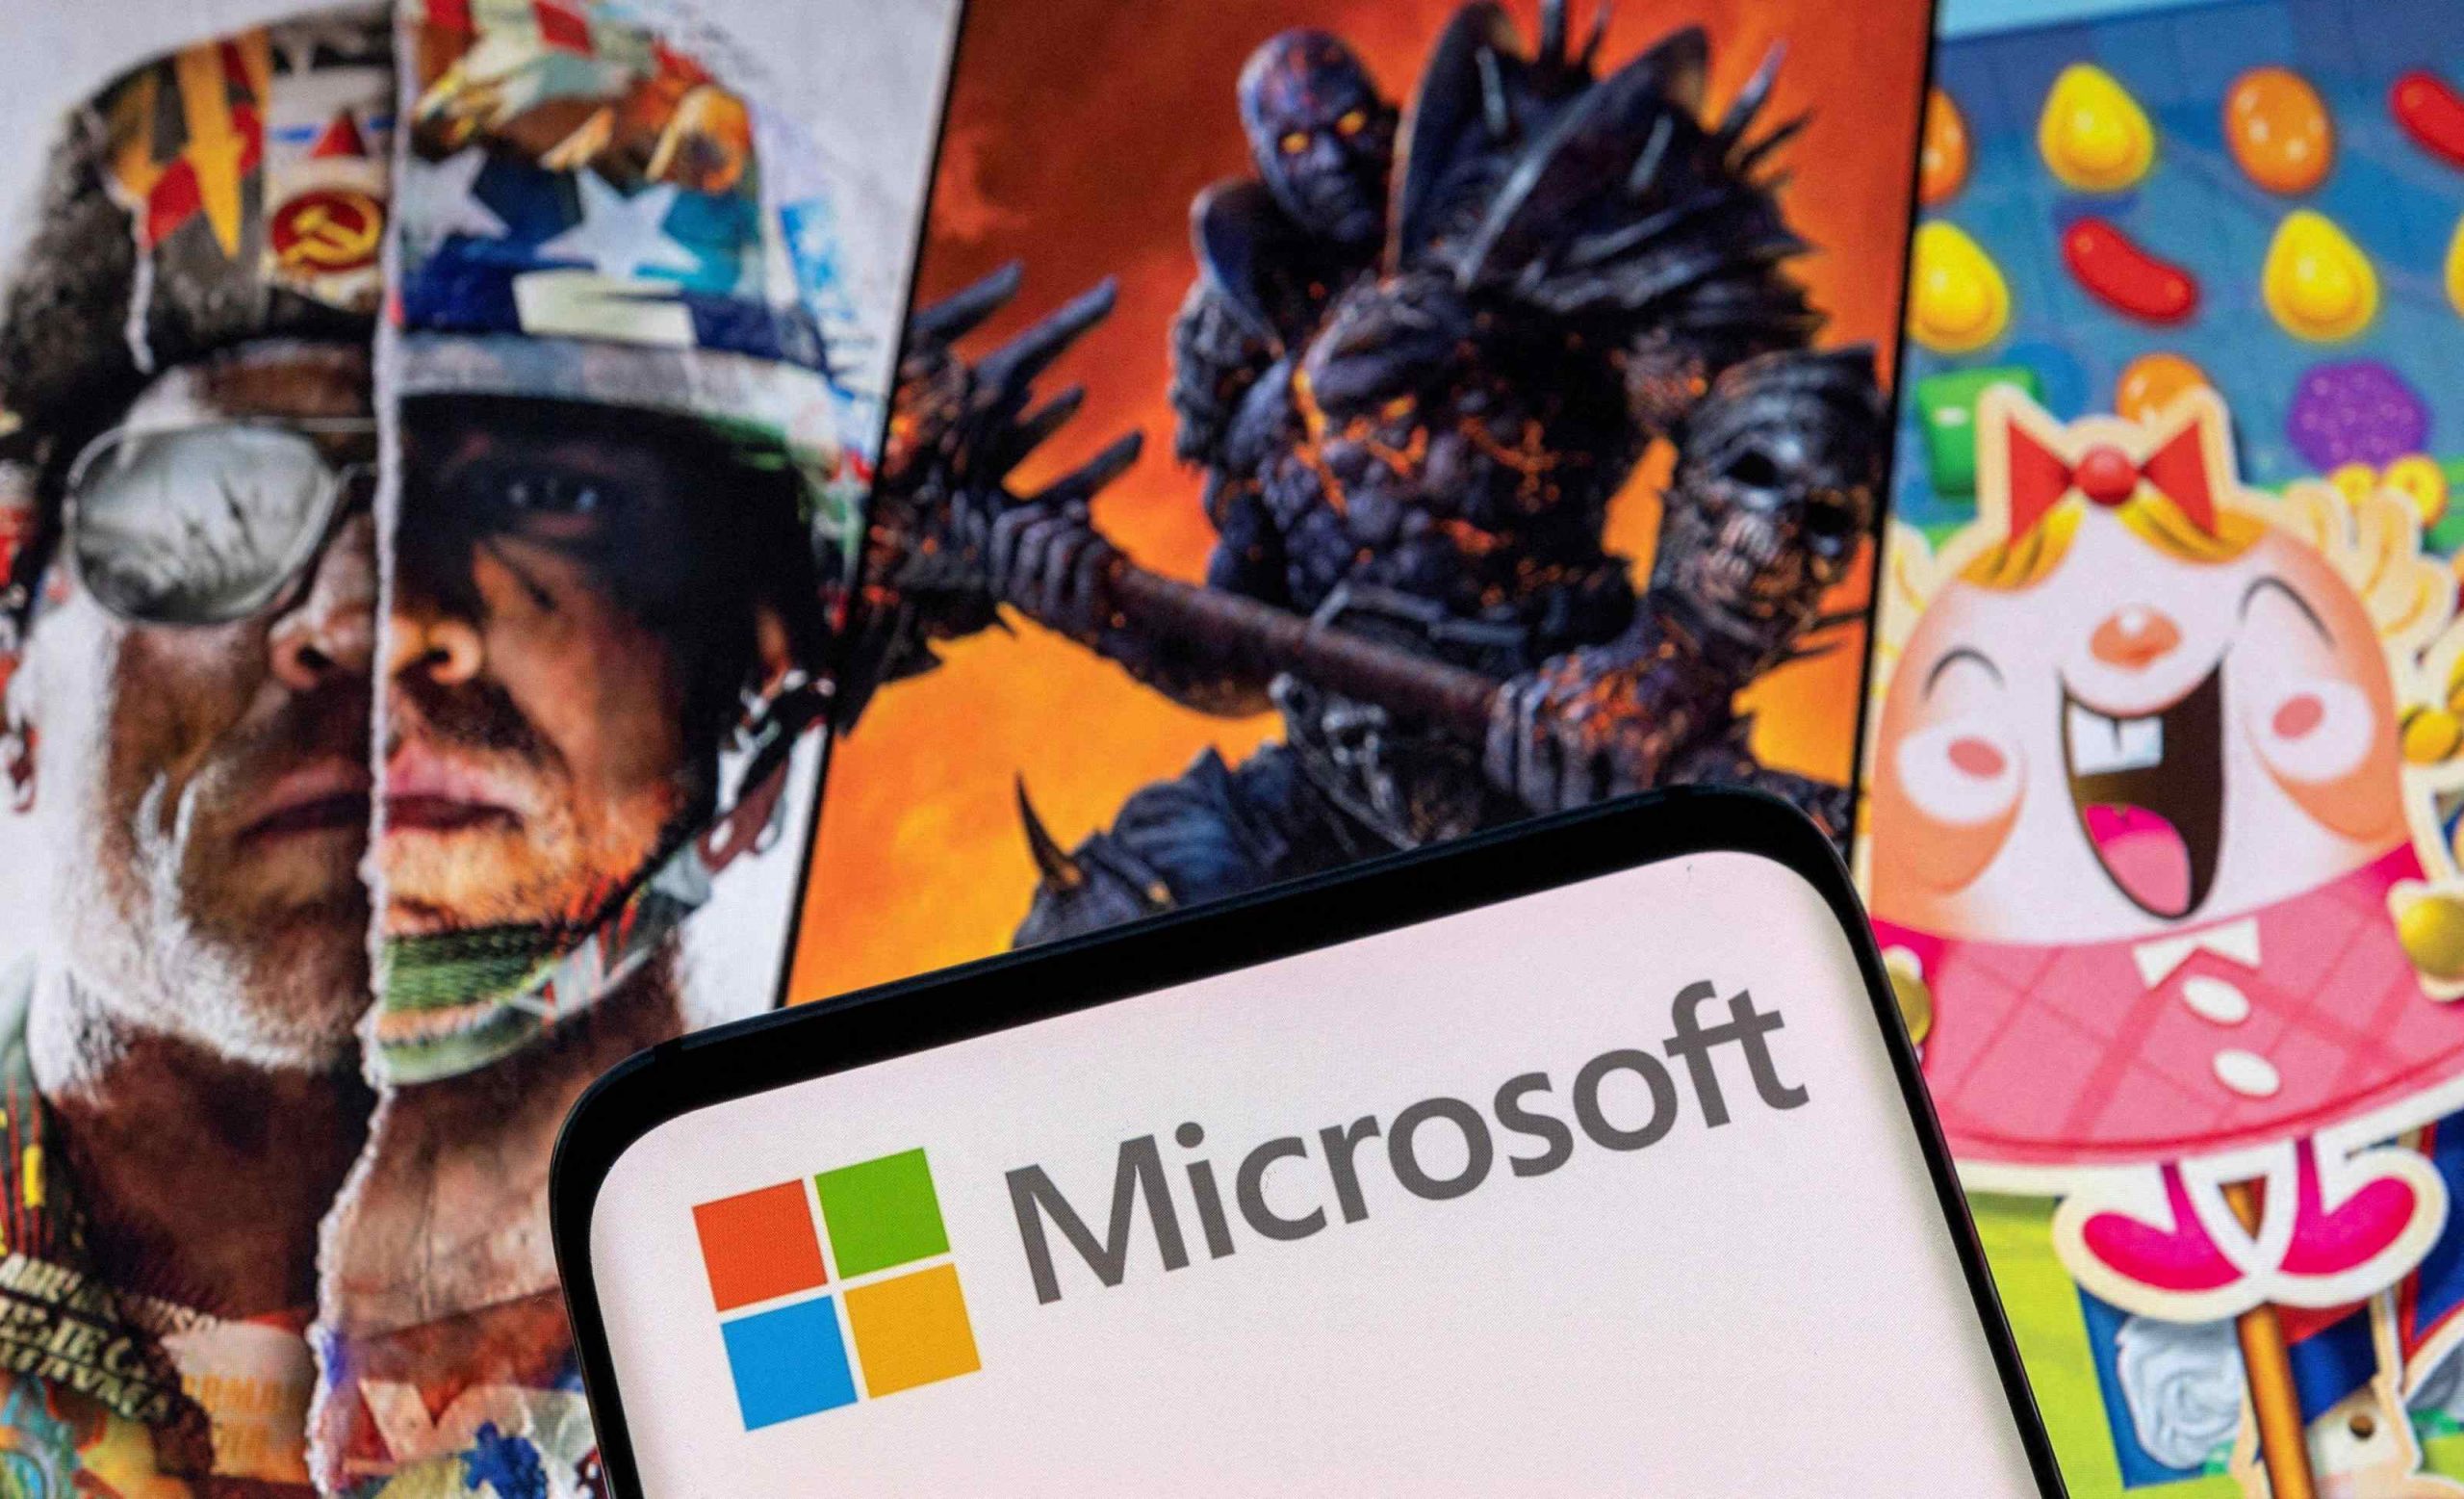 Microsoft-Activision Blizzard Restructured Deal Could Face Fresh Probe